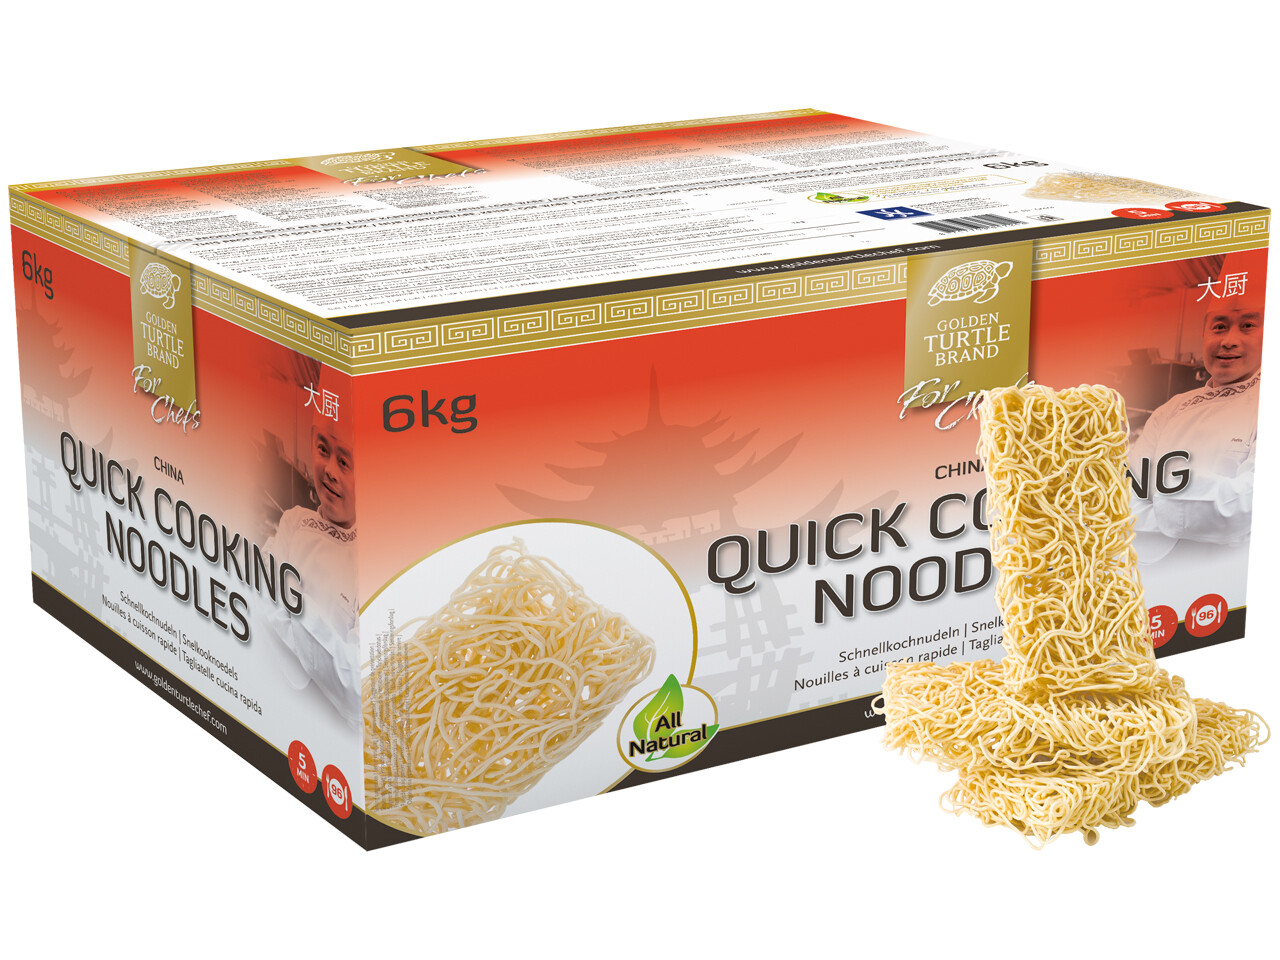 Quick Cooking Noodles 6kg Golden Turtle Brand for Chefs